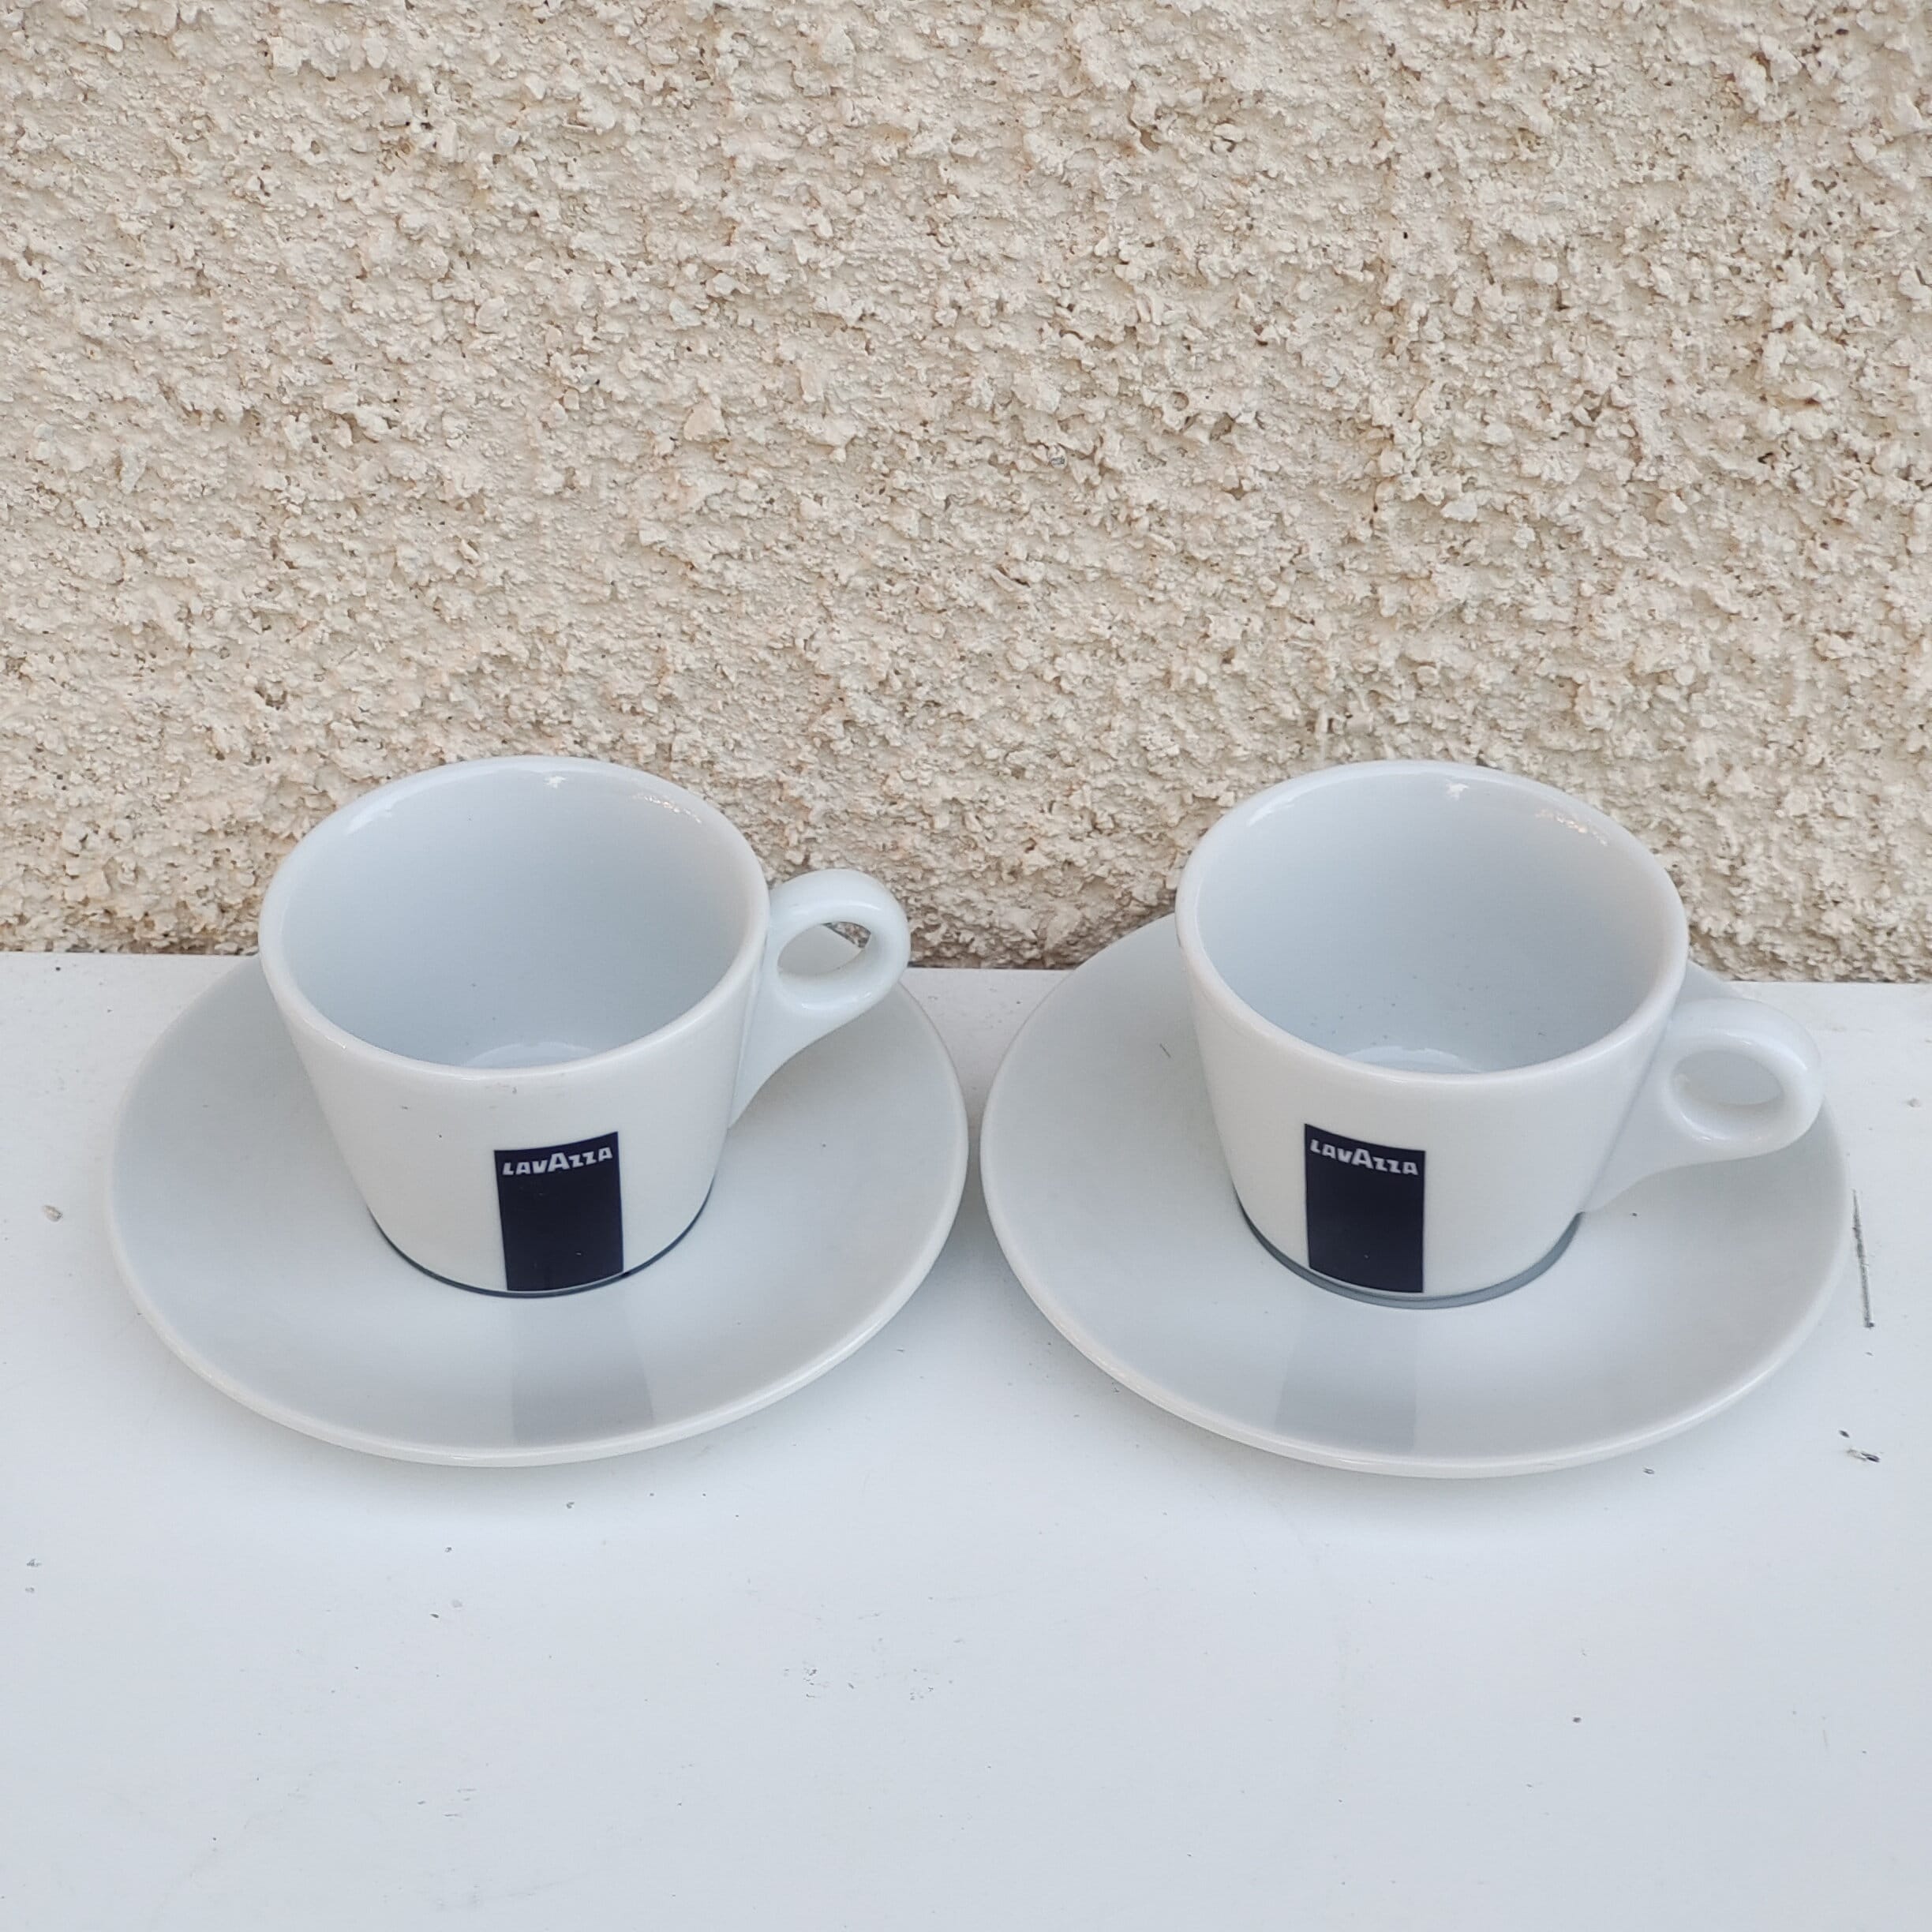 2 Classic Coffee Lavazza Blue Espresso Cups, White Porcelain Cups, Vintage  Bar Lavazza Cups, Made in Italy, Excellent Condition 